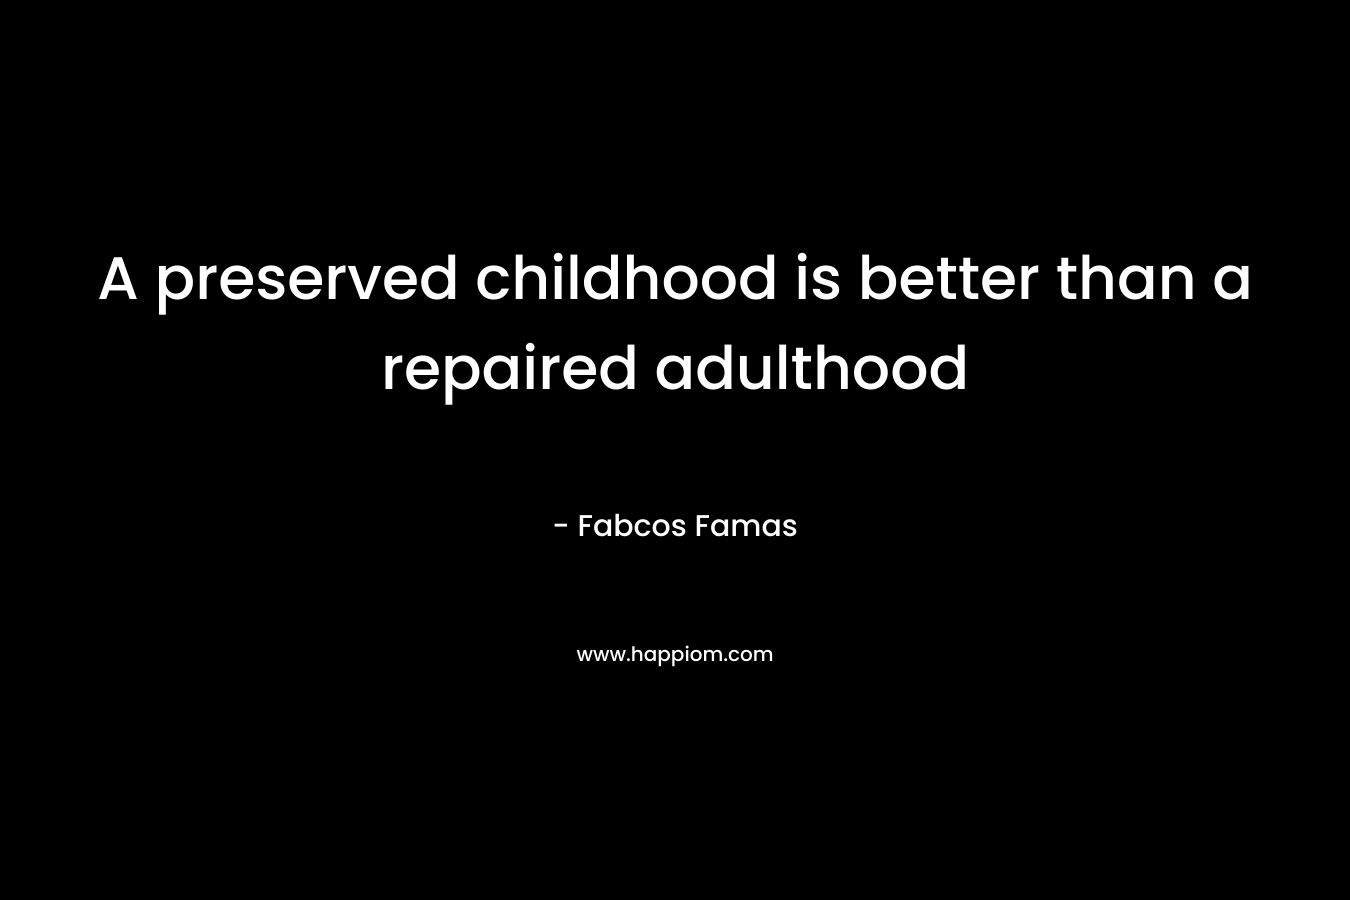 A preserved childhood is better than a repaired adulthood